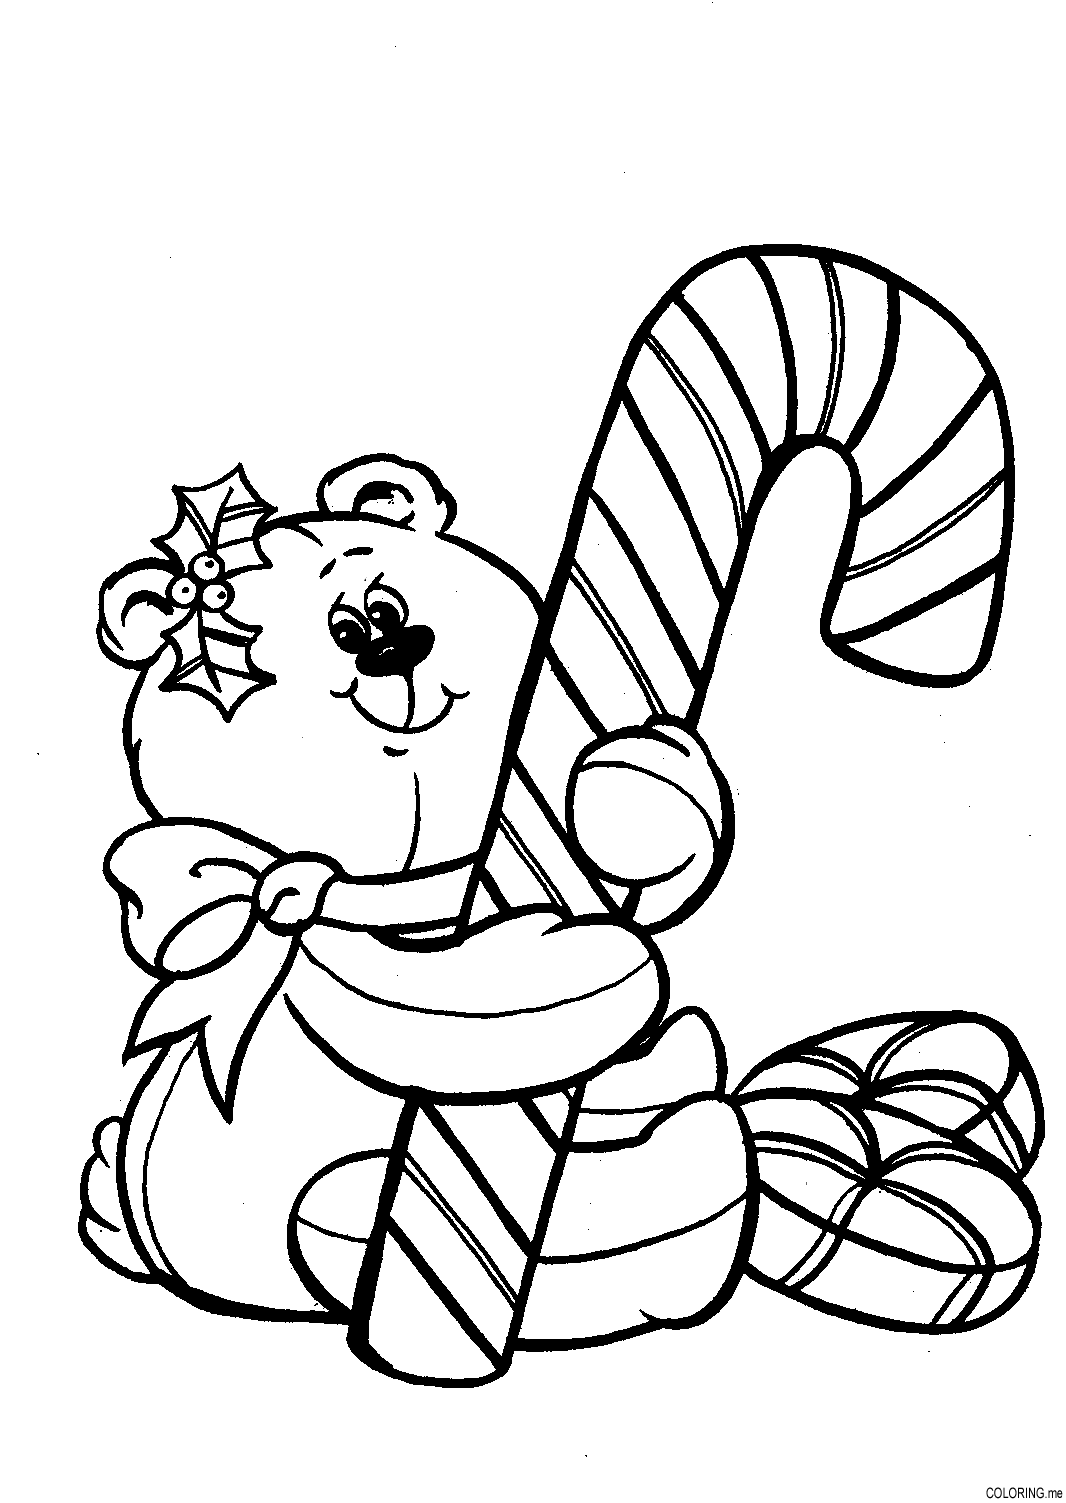 coloring-page-christmas-bear-happy-coloring-me